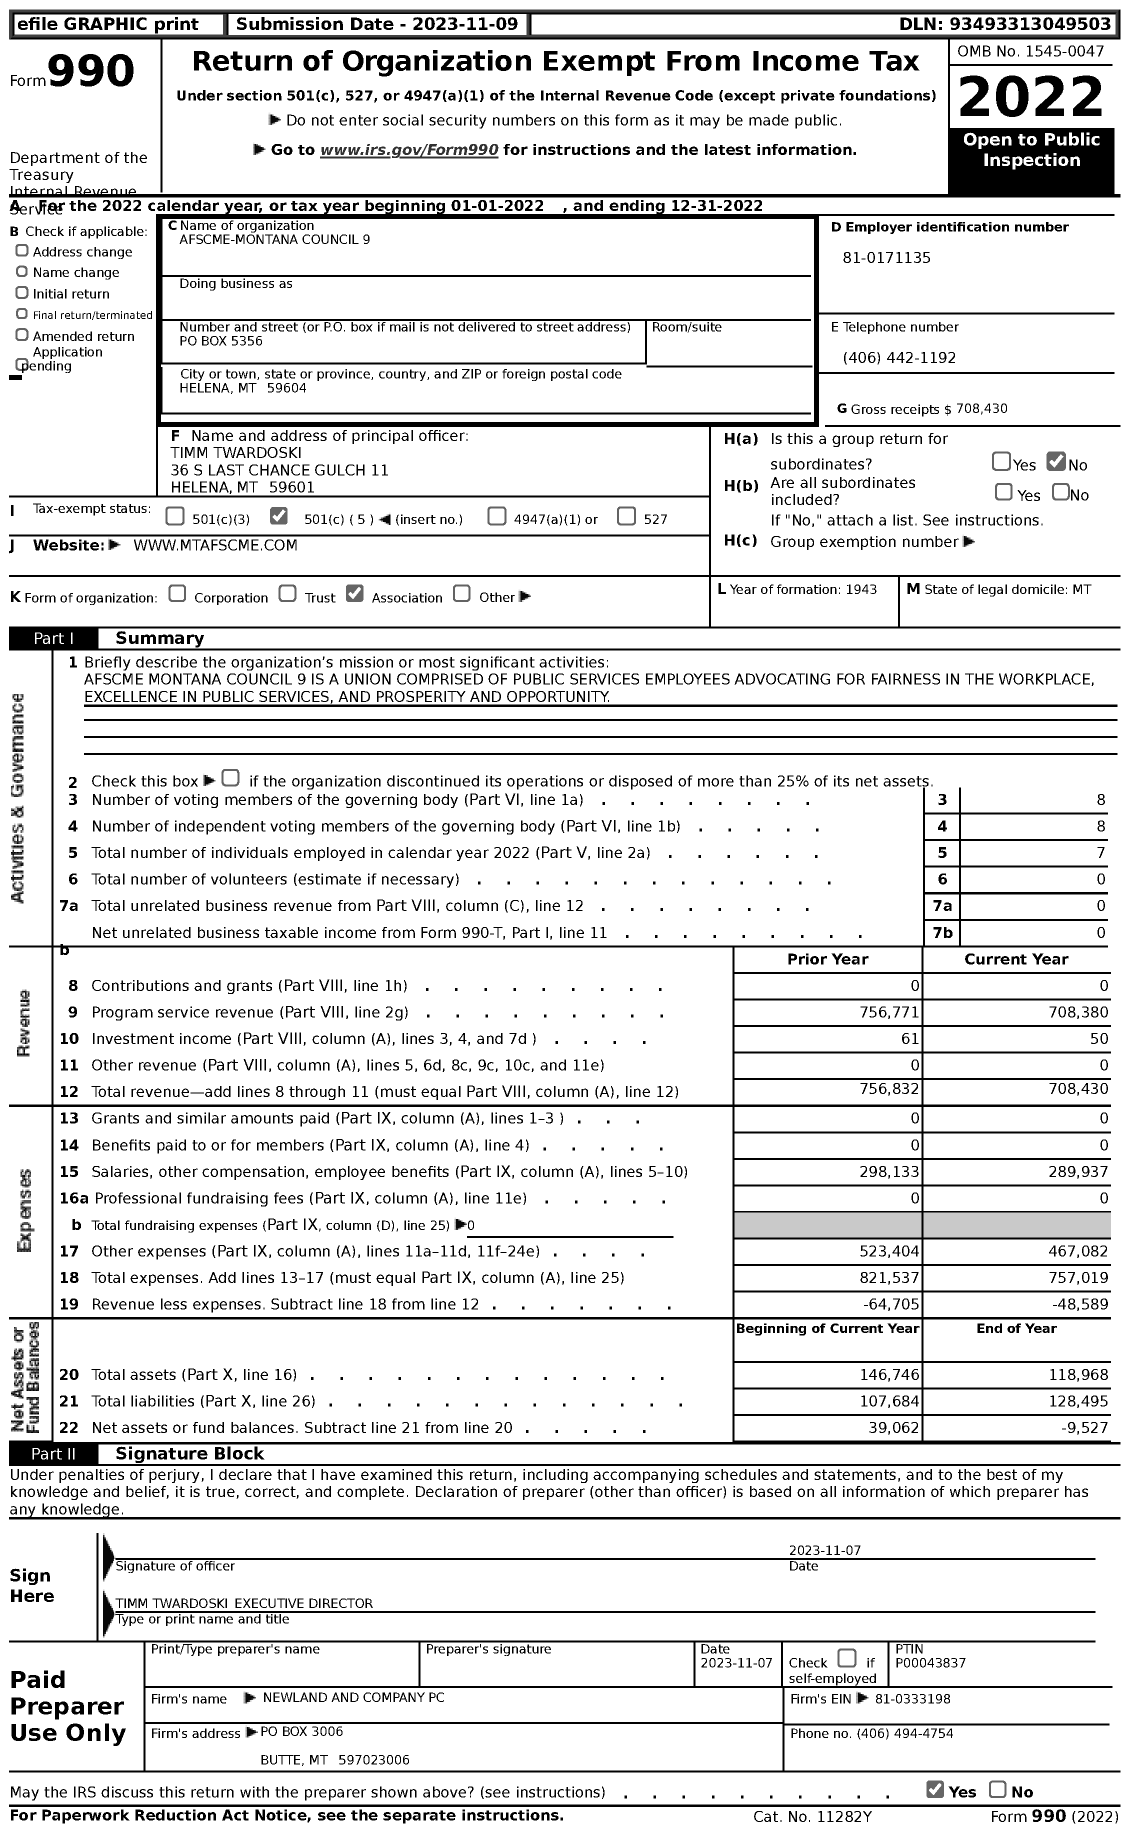 Image of first page of 2022 Form 990 for American Federation of State County & Municipal Employees - C0009MT Montana State Council 9